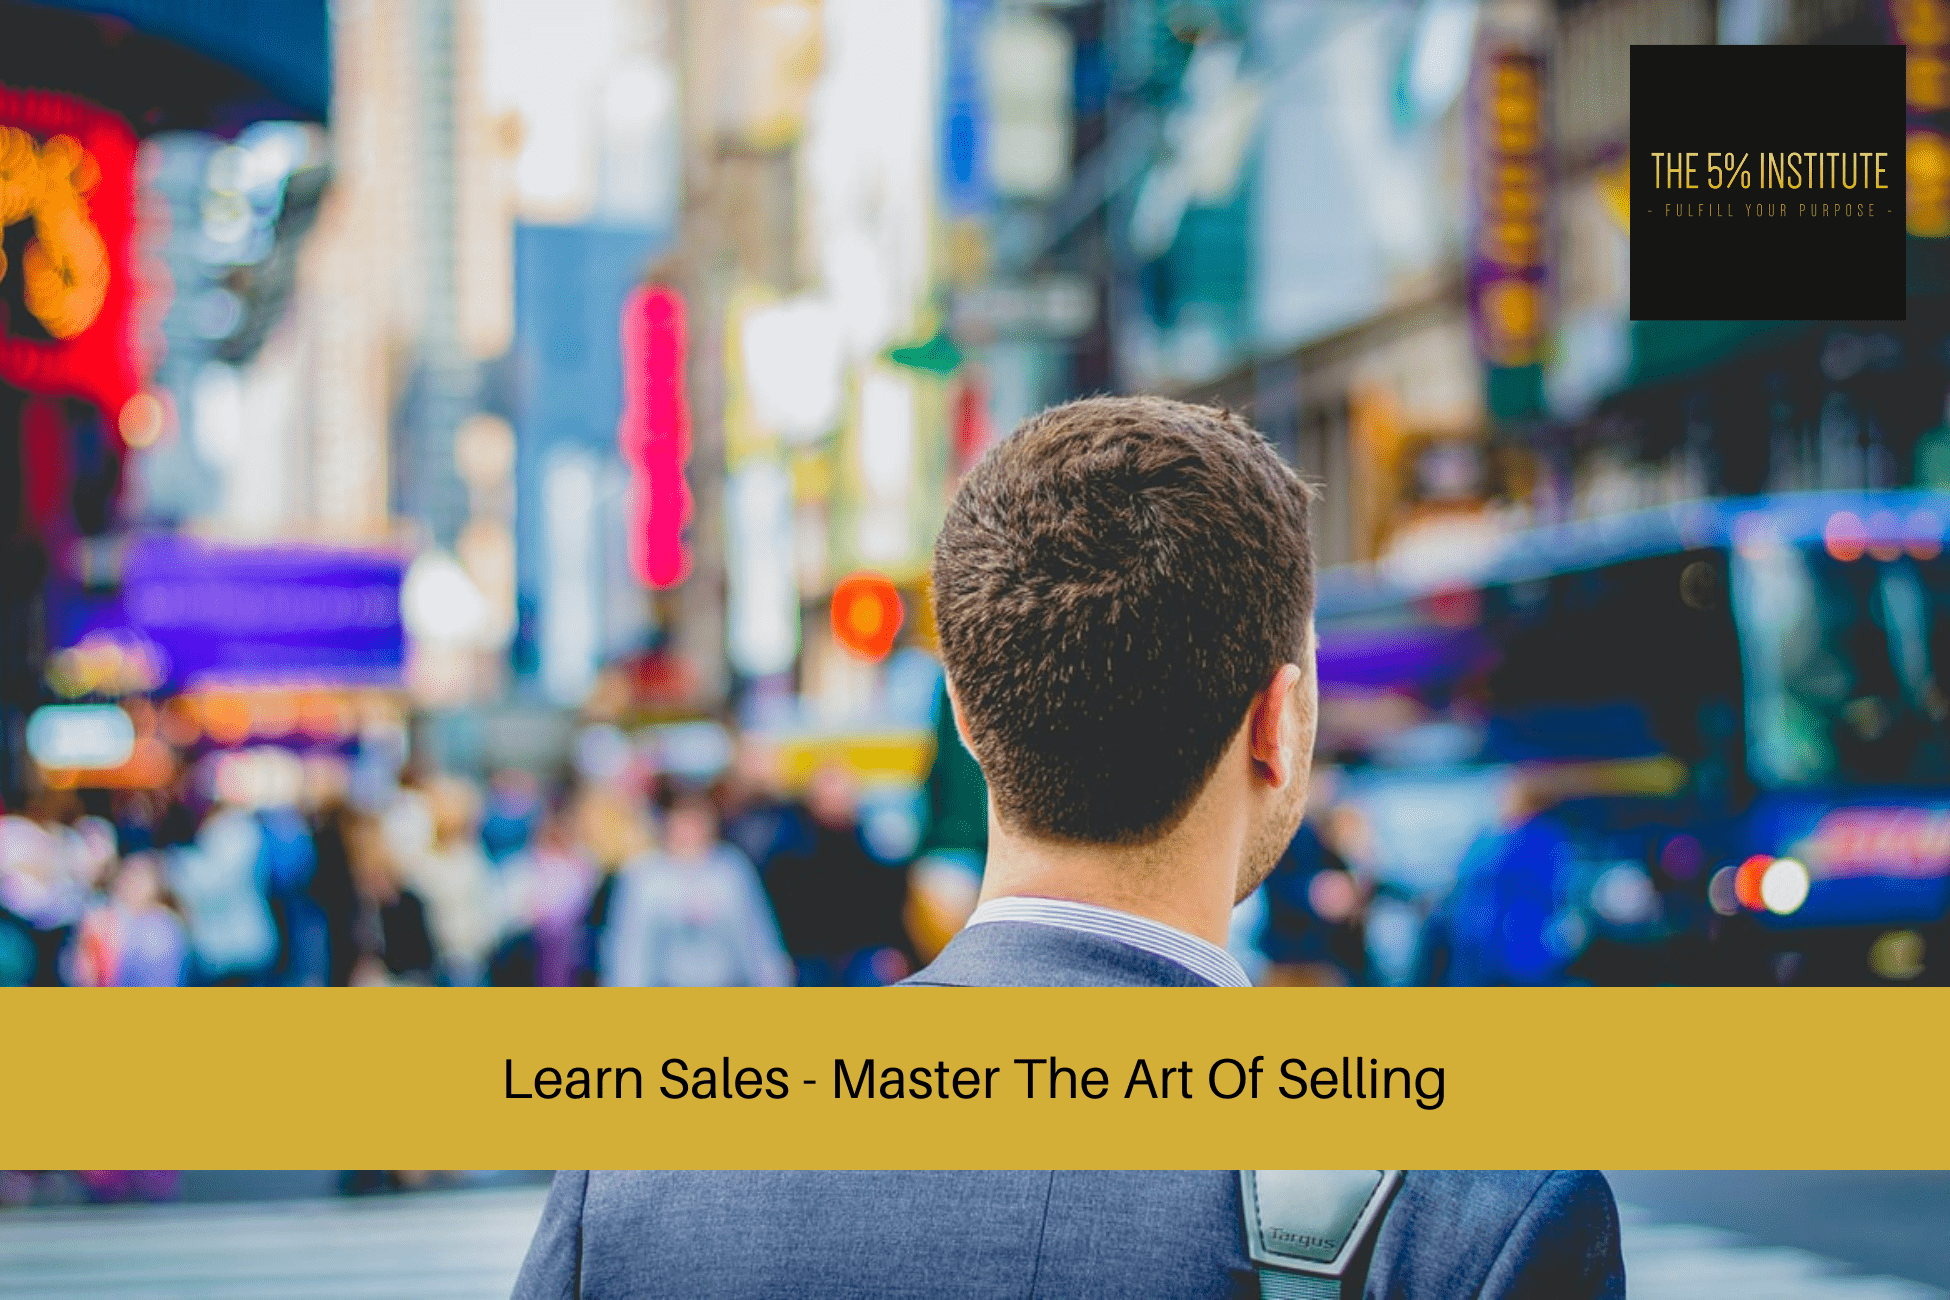 Learn Sales - Master The Art Of Selling